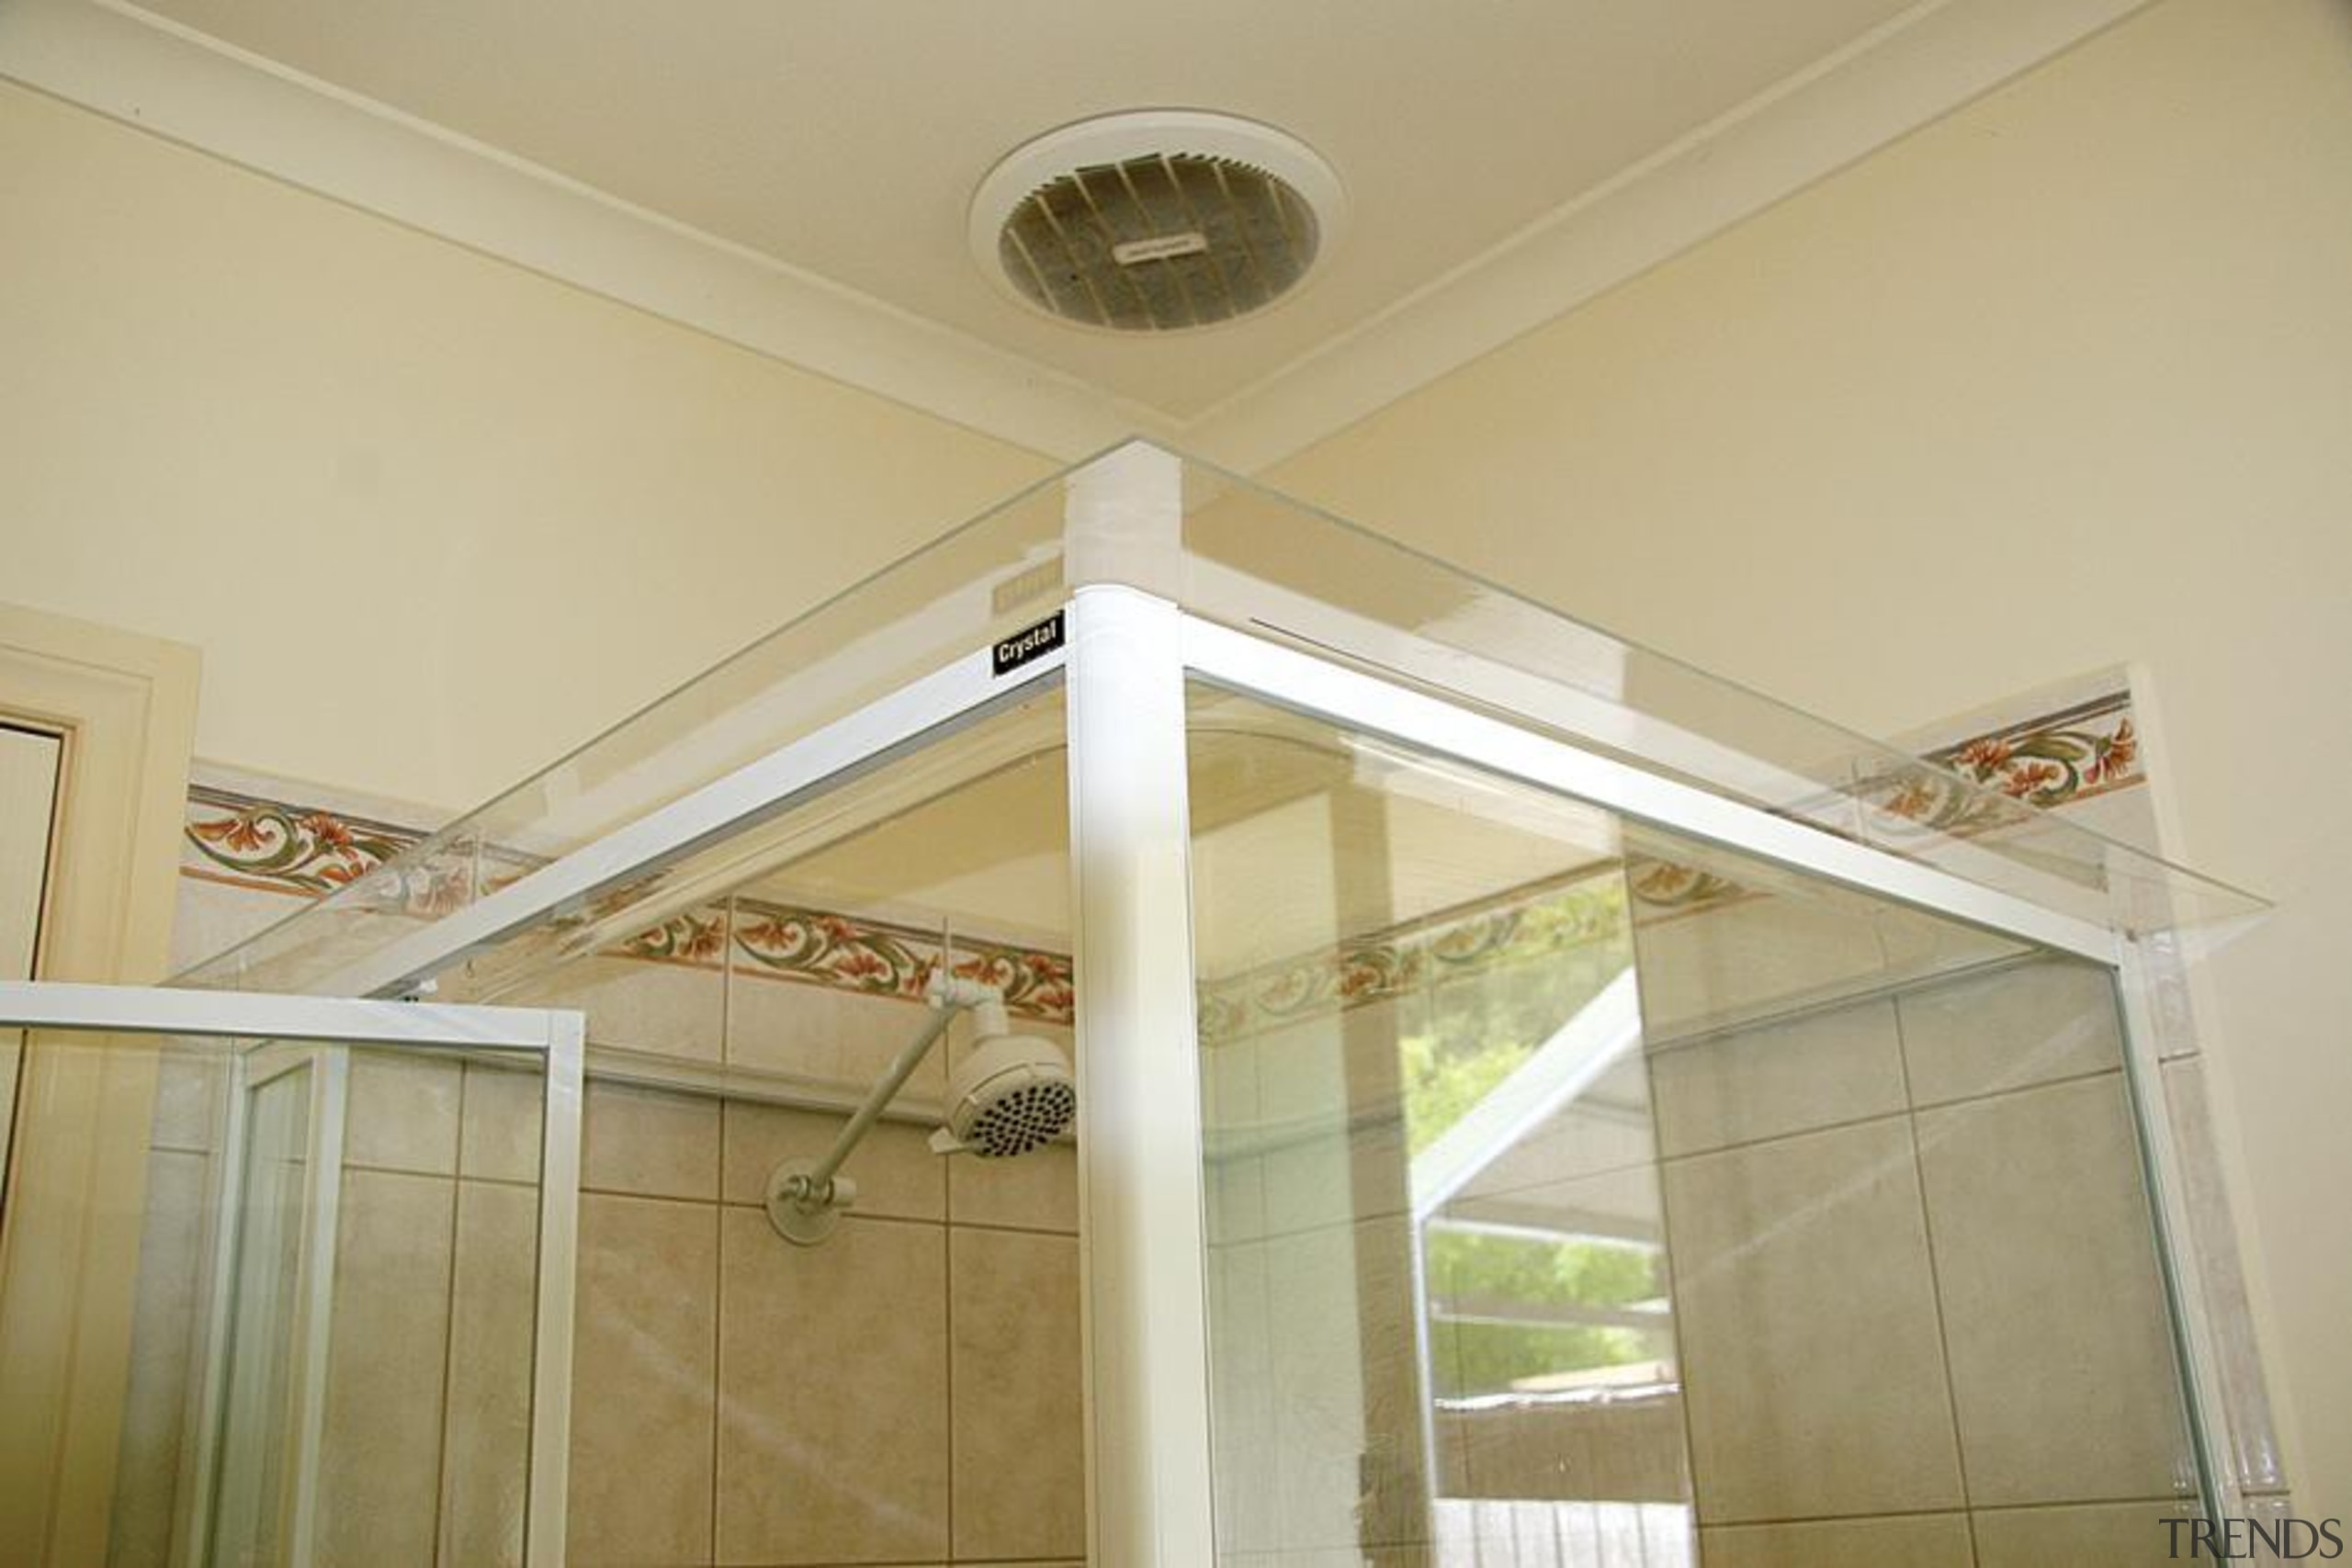 At this point, slide the Showerdome into position, beam, ceiling, daylighting, estate, home, interior design, molding, structure, wall, window, orange